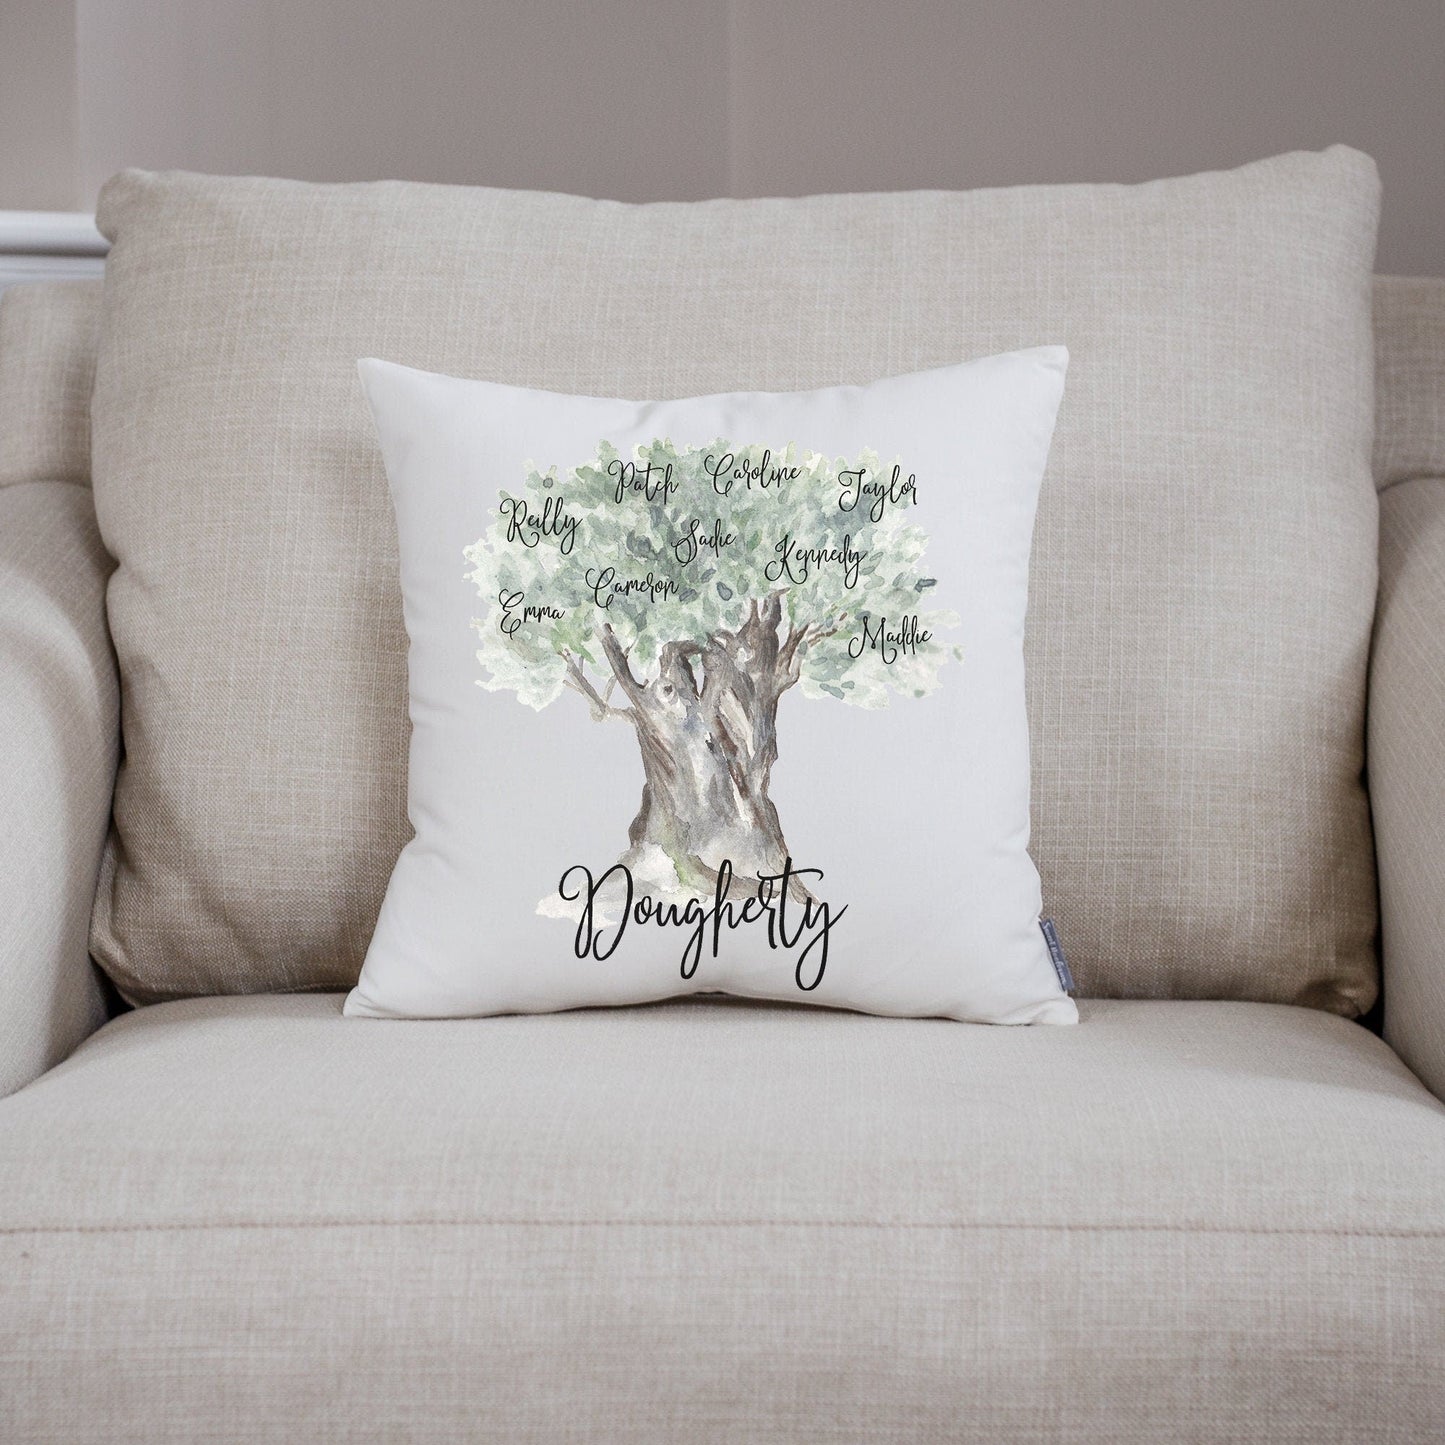 Load image into Gallery viewer, Family Tree Pillow | Grandkids Names | Grandparent Gift | Personalized Grandchildren Names | Gift For Grandparents | Names of Grandchildren
